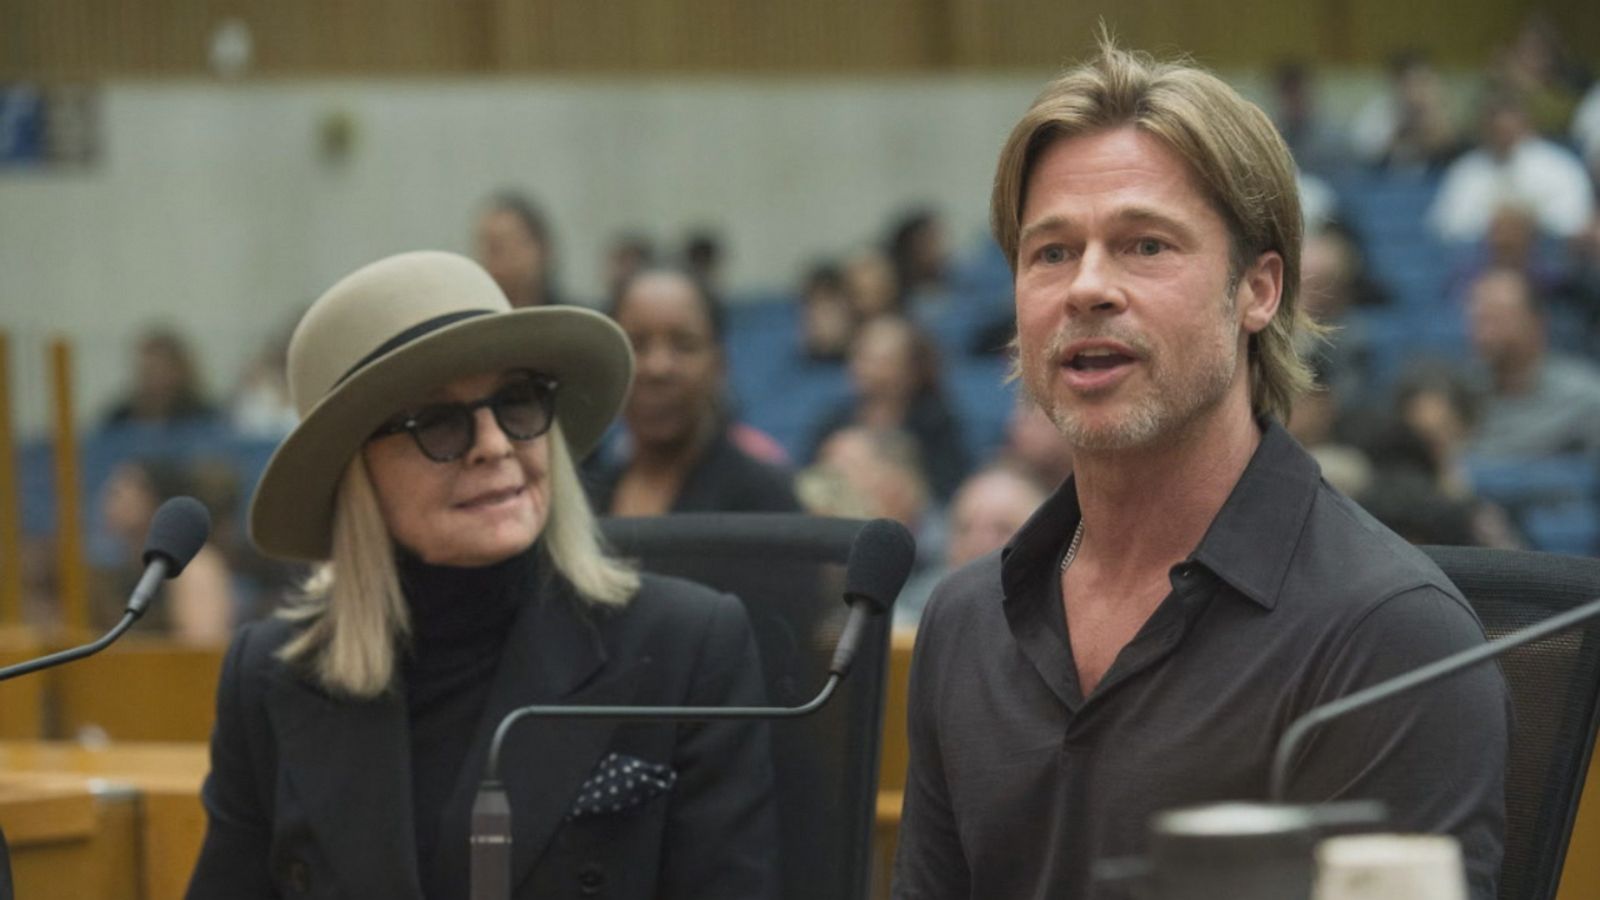 Brad Pitt Stepped Out in a Giant Fuzzy Bucket Hat: Pics